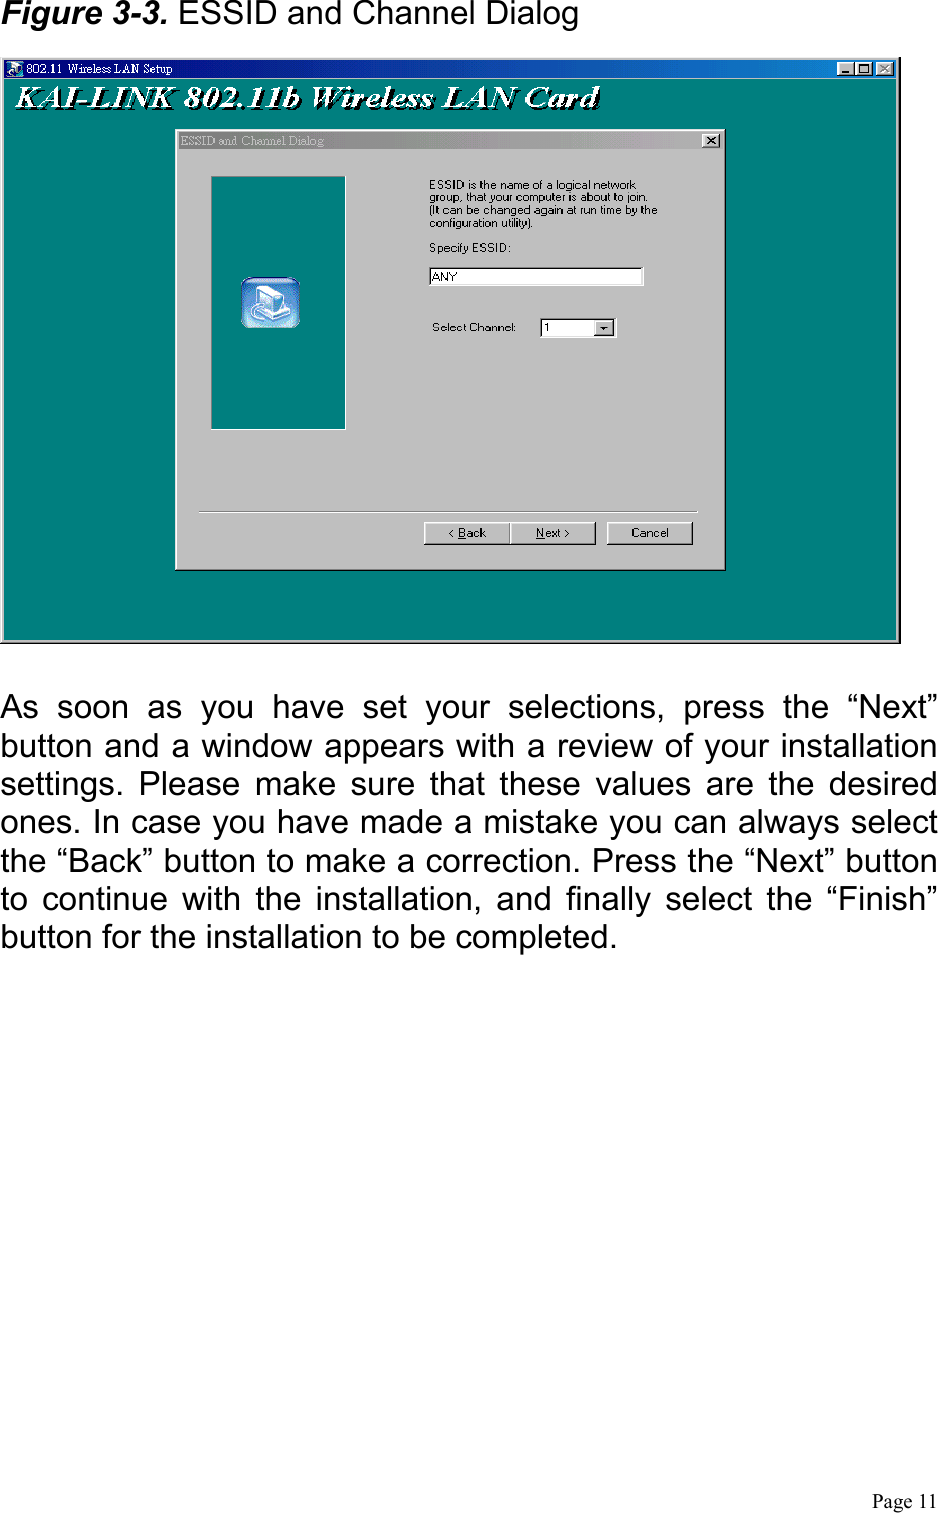  Page 11 Figure 3-3. ESSID and Channel Dialog   As soon as you have set your selections, press the “Next” button and a window appears with a review of your installation settings. Please make sure that these values are the desired ones. In case you have made a mistake you can always select the “Back” button to make a correction. Press the “Next” button to continue with the installation, and finally select the “Finish” button for the installation to be completed. 